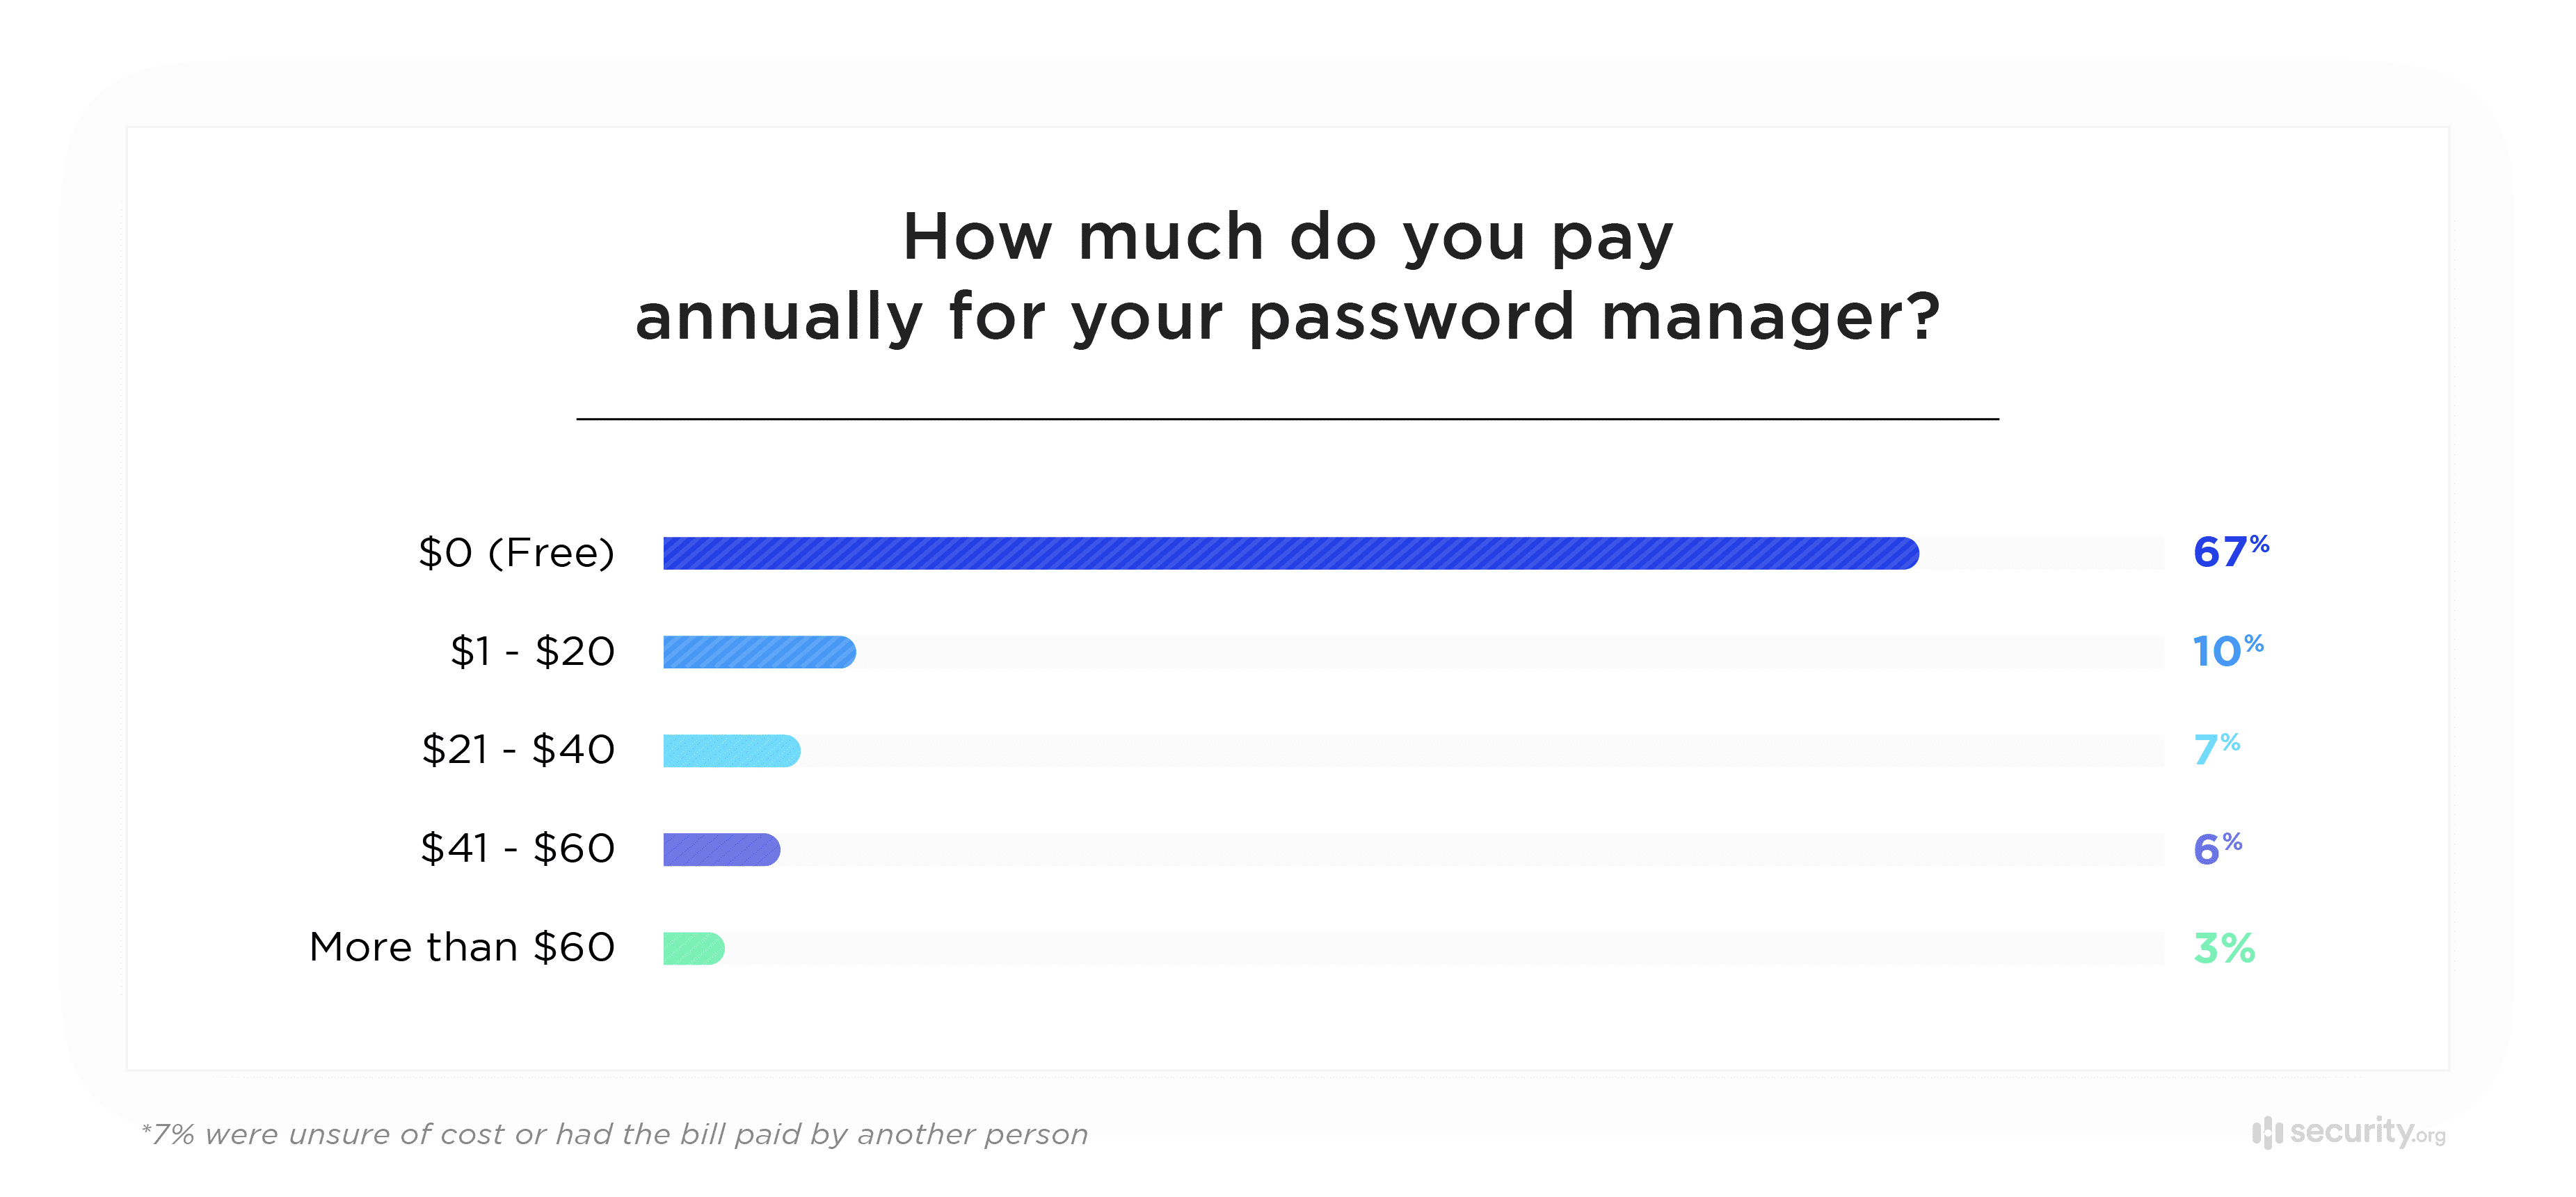 How much do you pay annually for your password manager